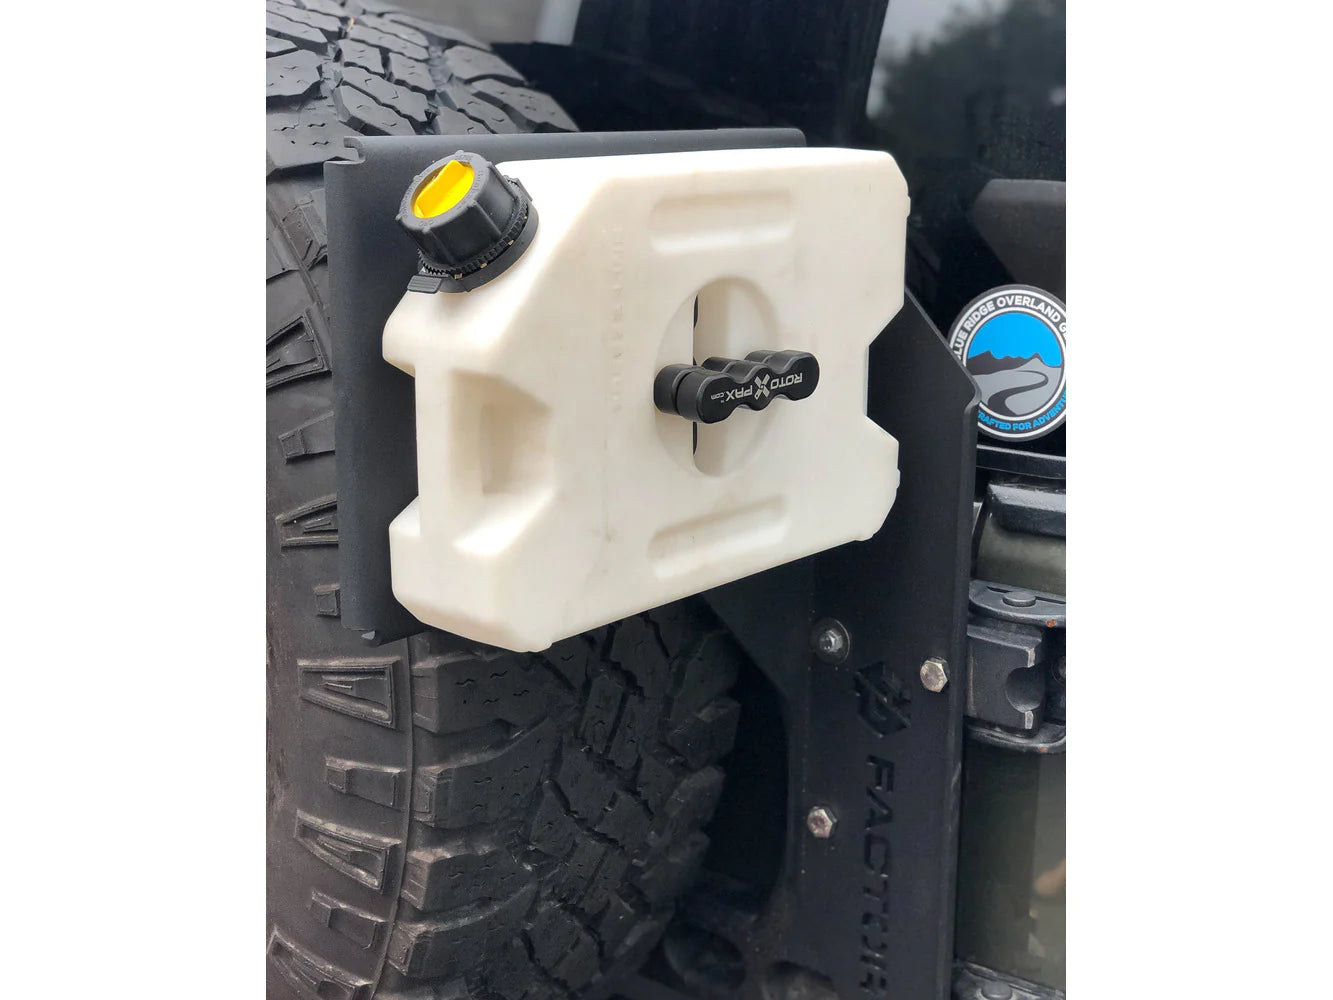 GP Factor HD Hinge Accessory Mount Jeep JK - Rotopax/traction boards